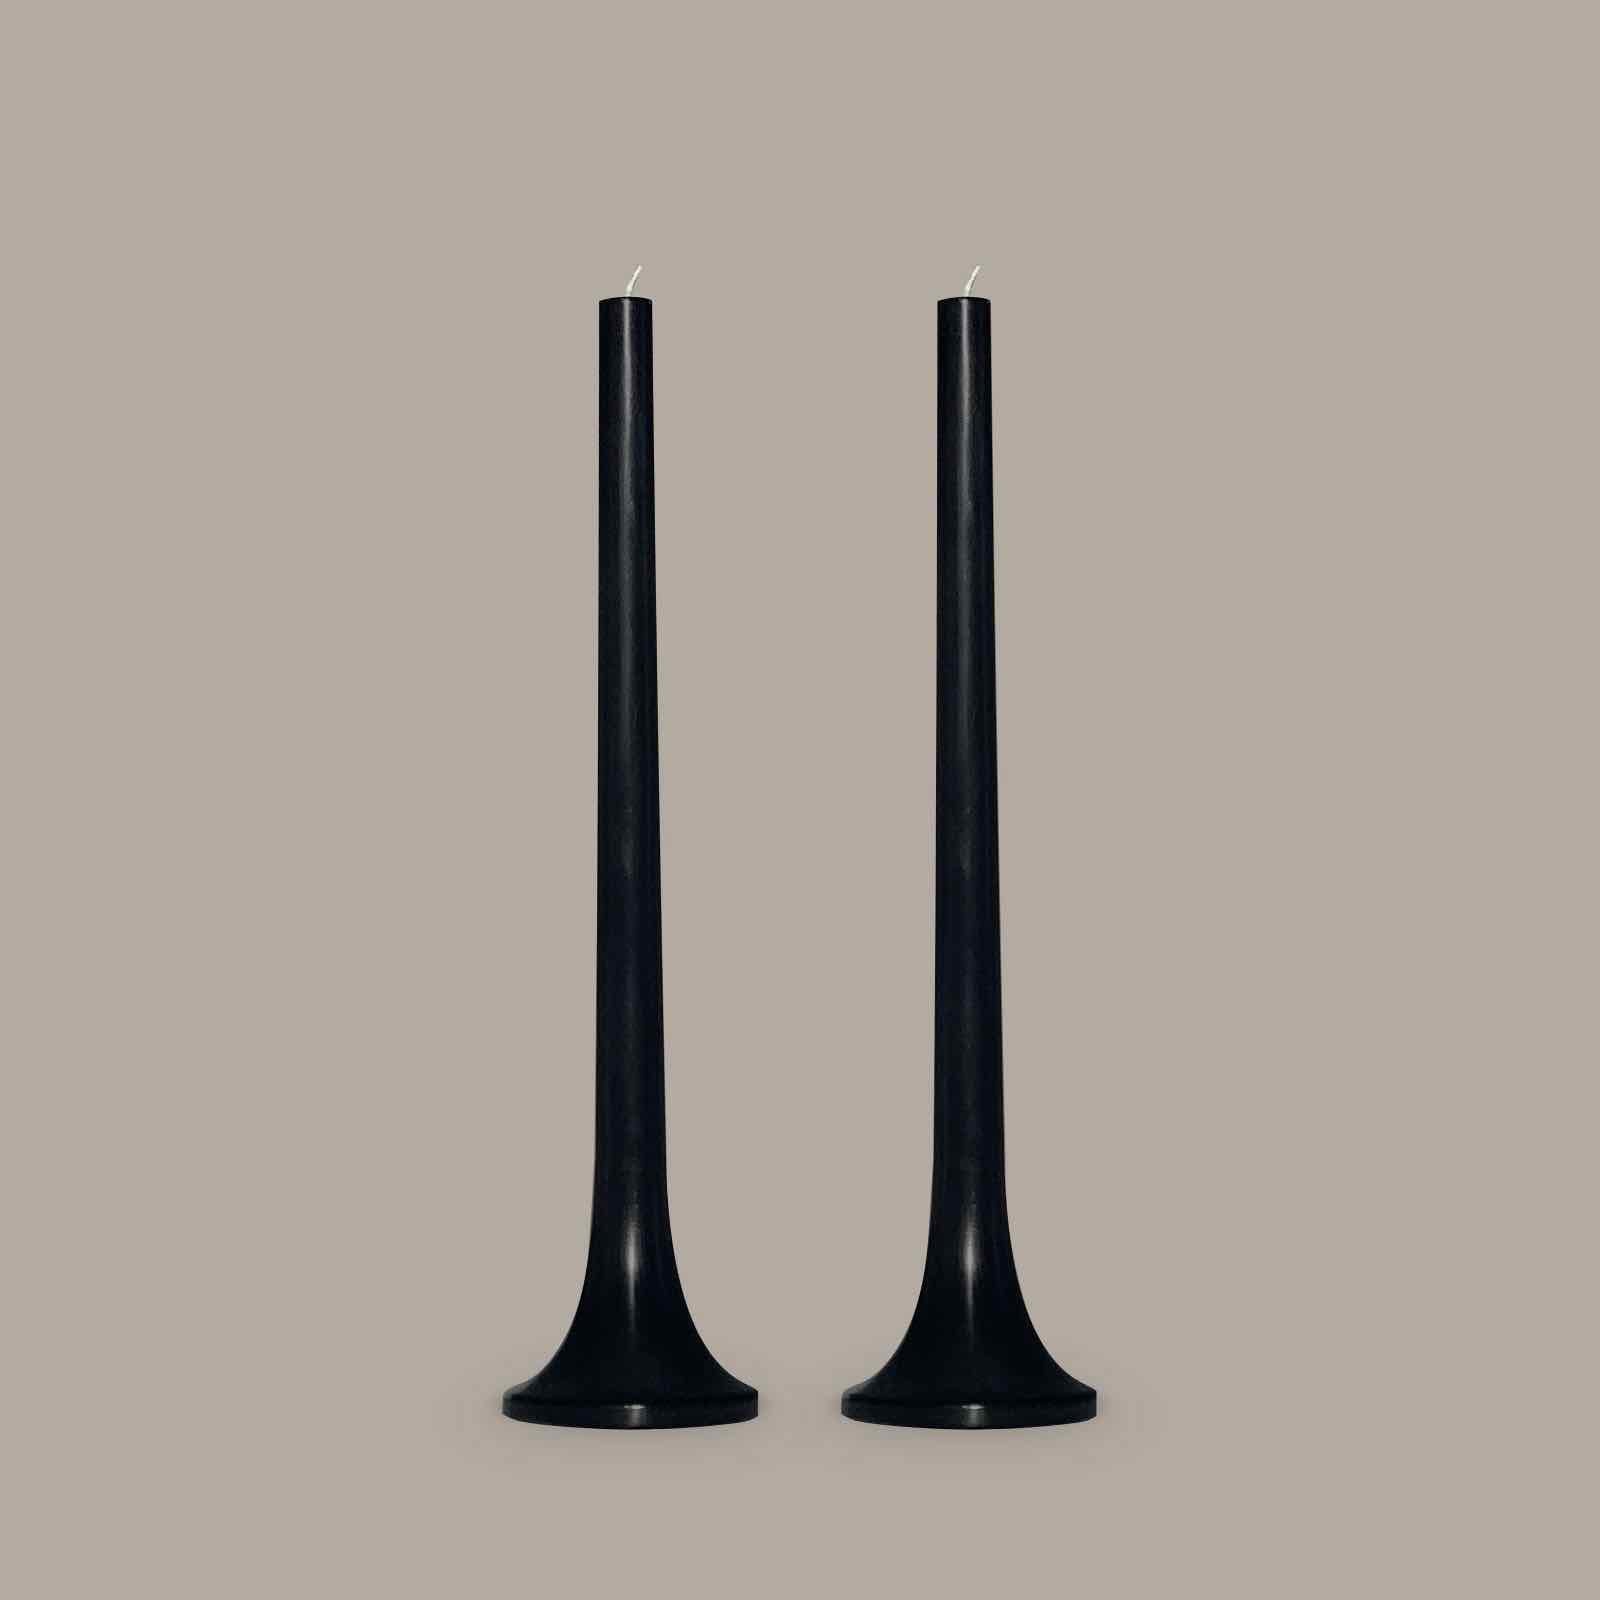 Tall black taper candle